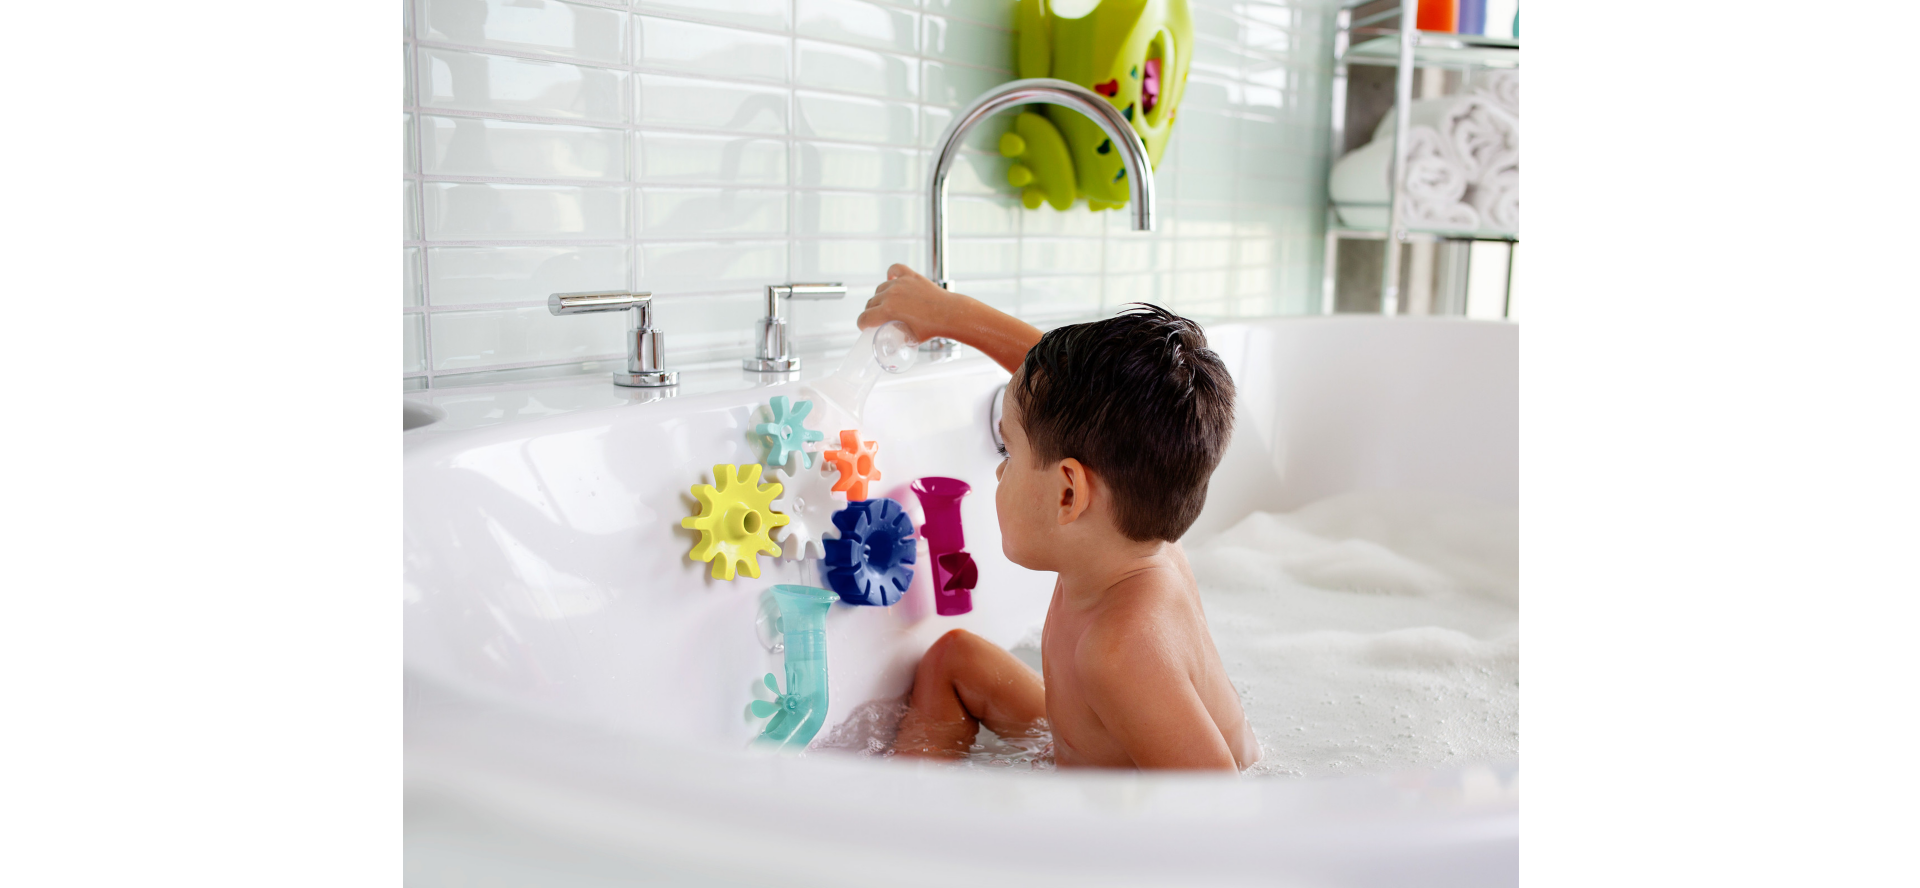 COGS, PIPES & TUBES BUNDLE - Ultimate Water Play Fun!